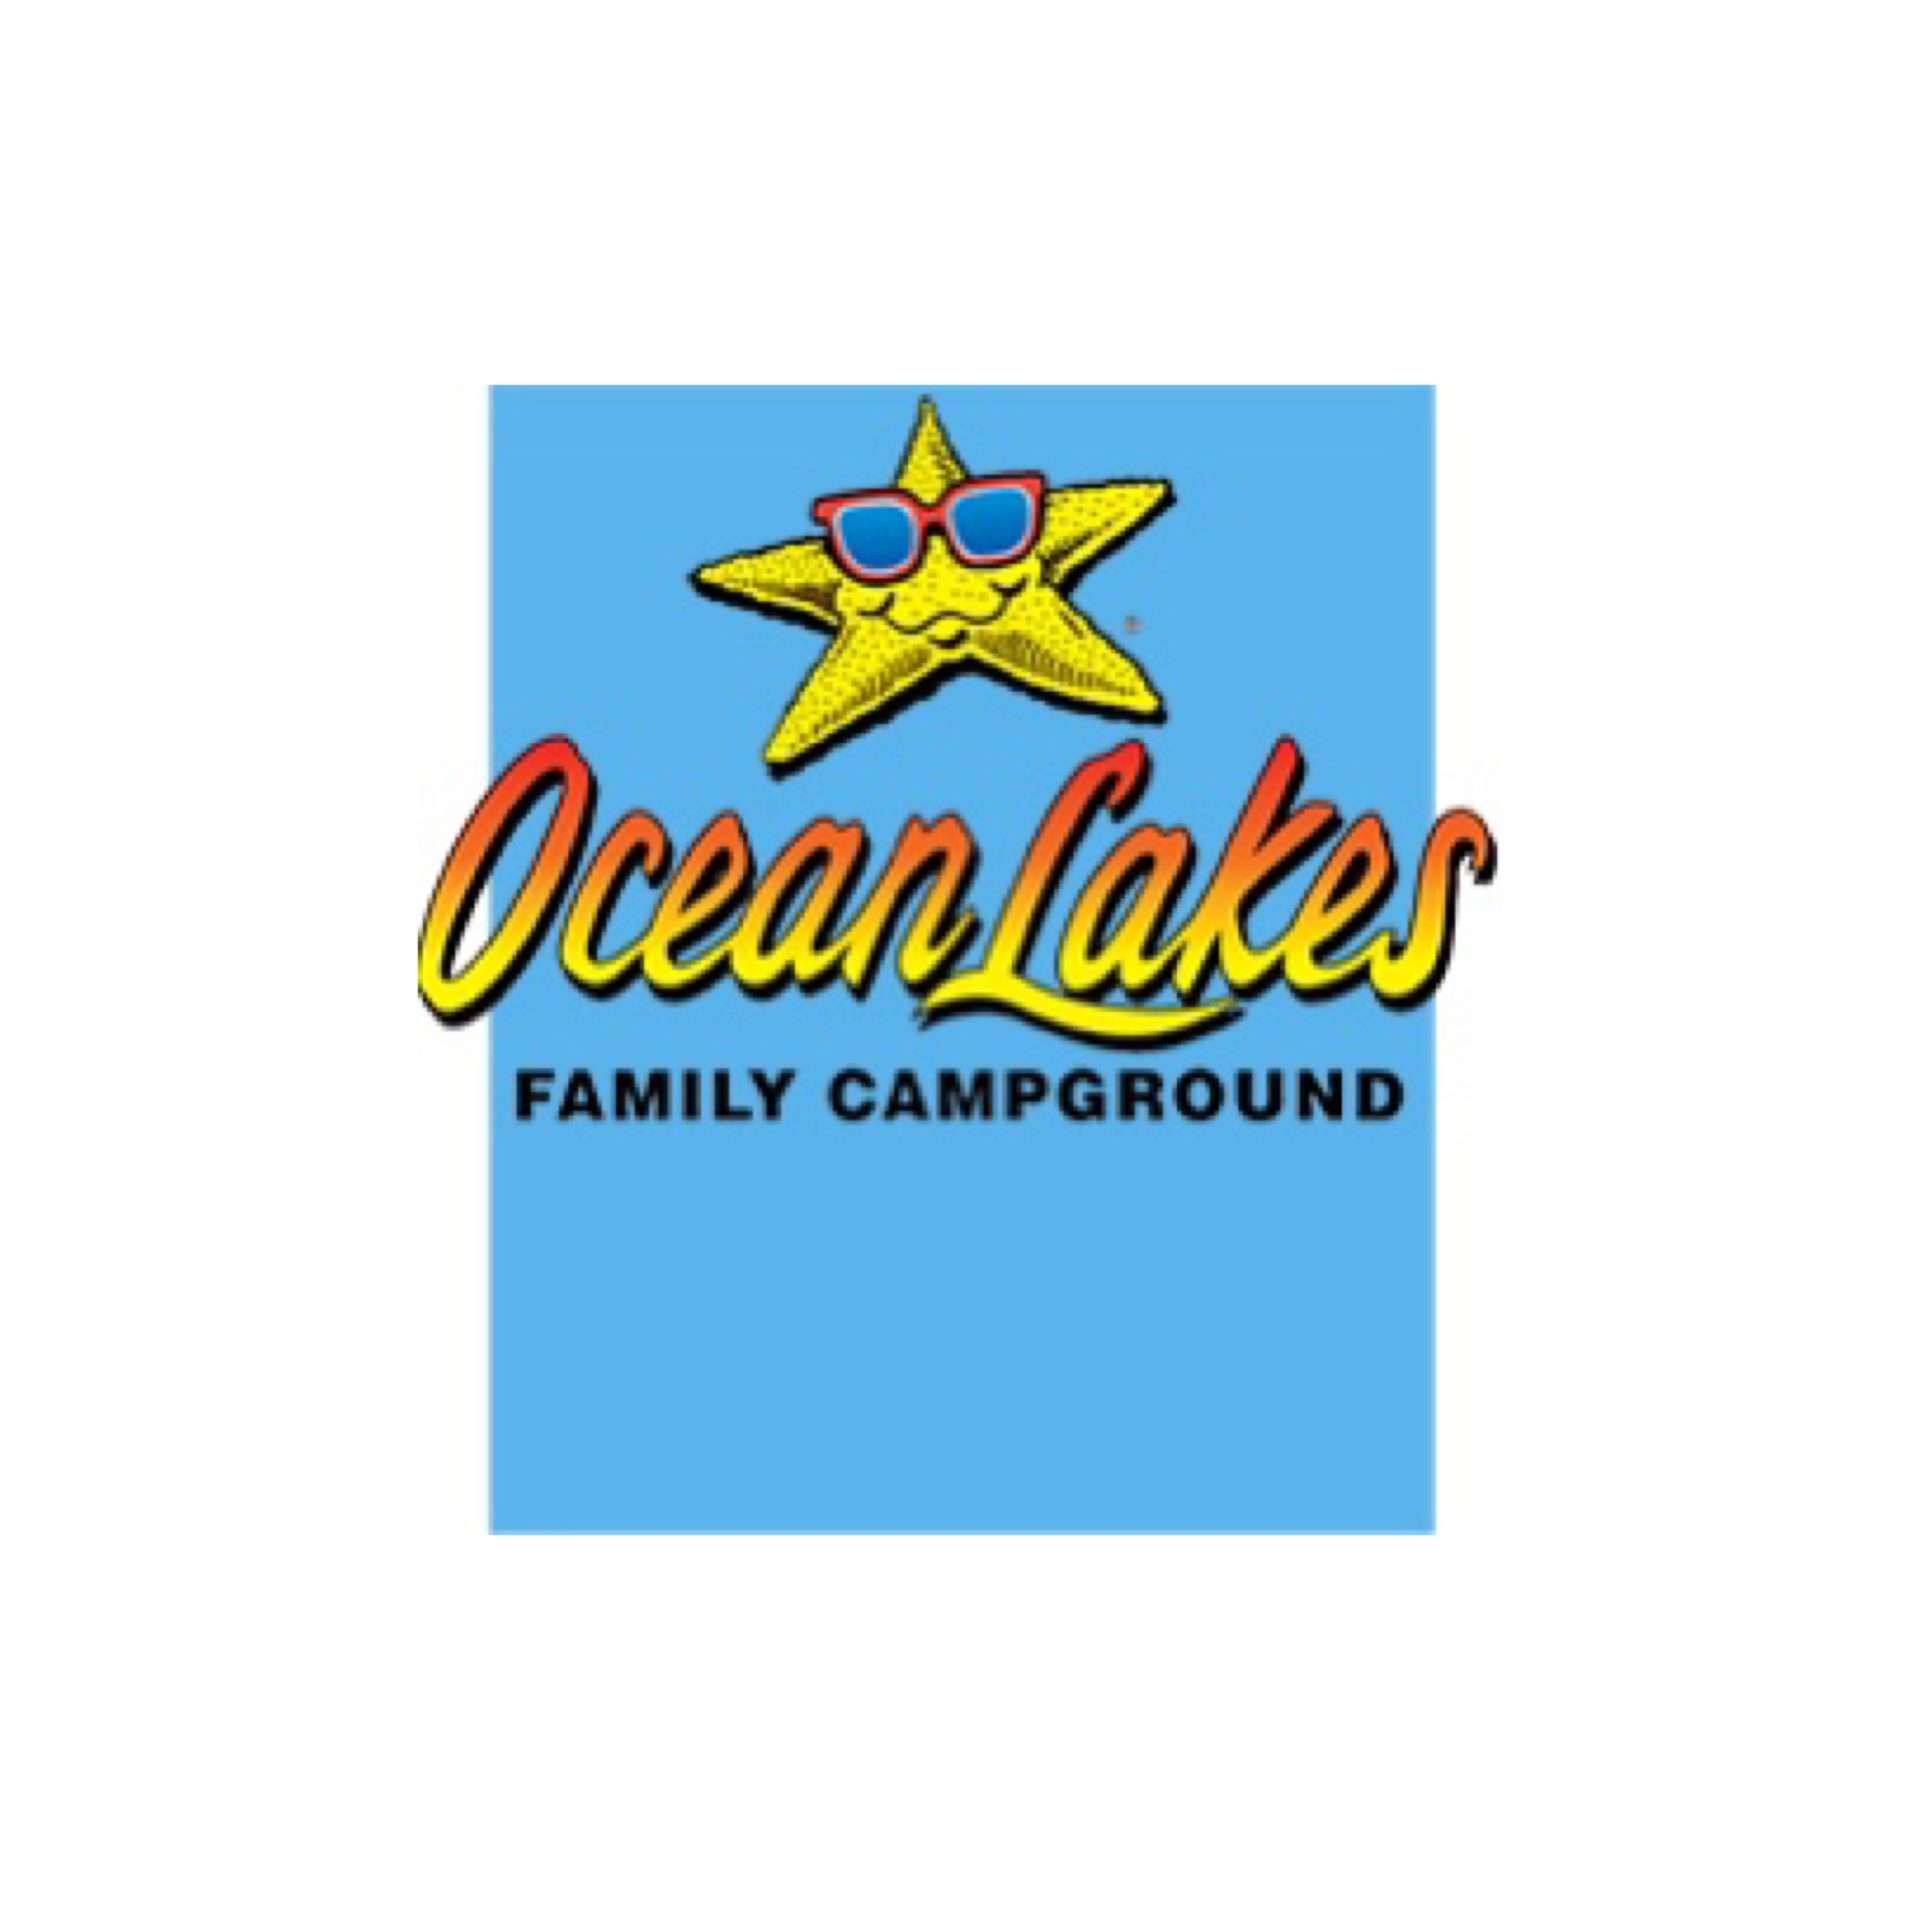 Ocean lakes Family Campground Myrtle Beach